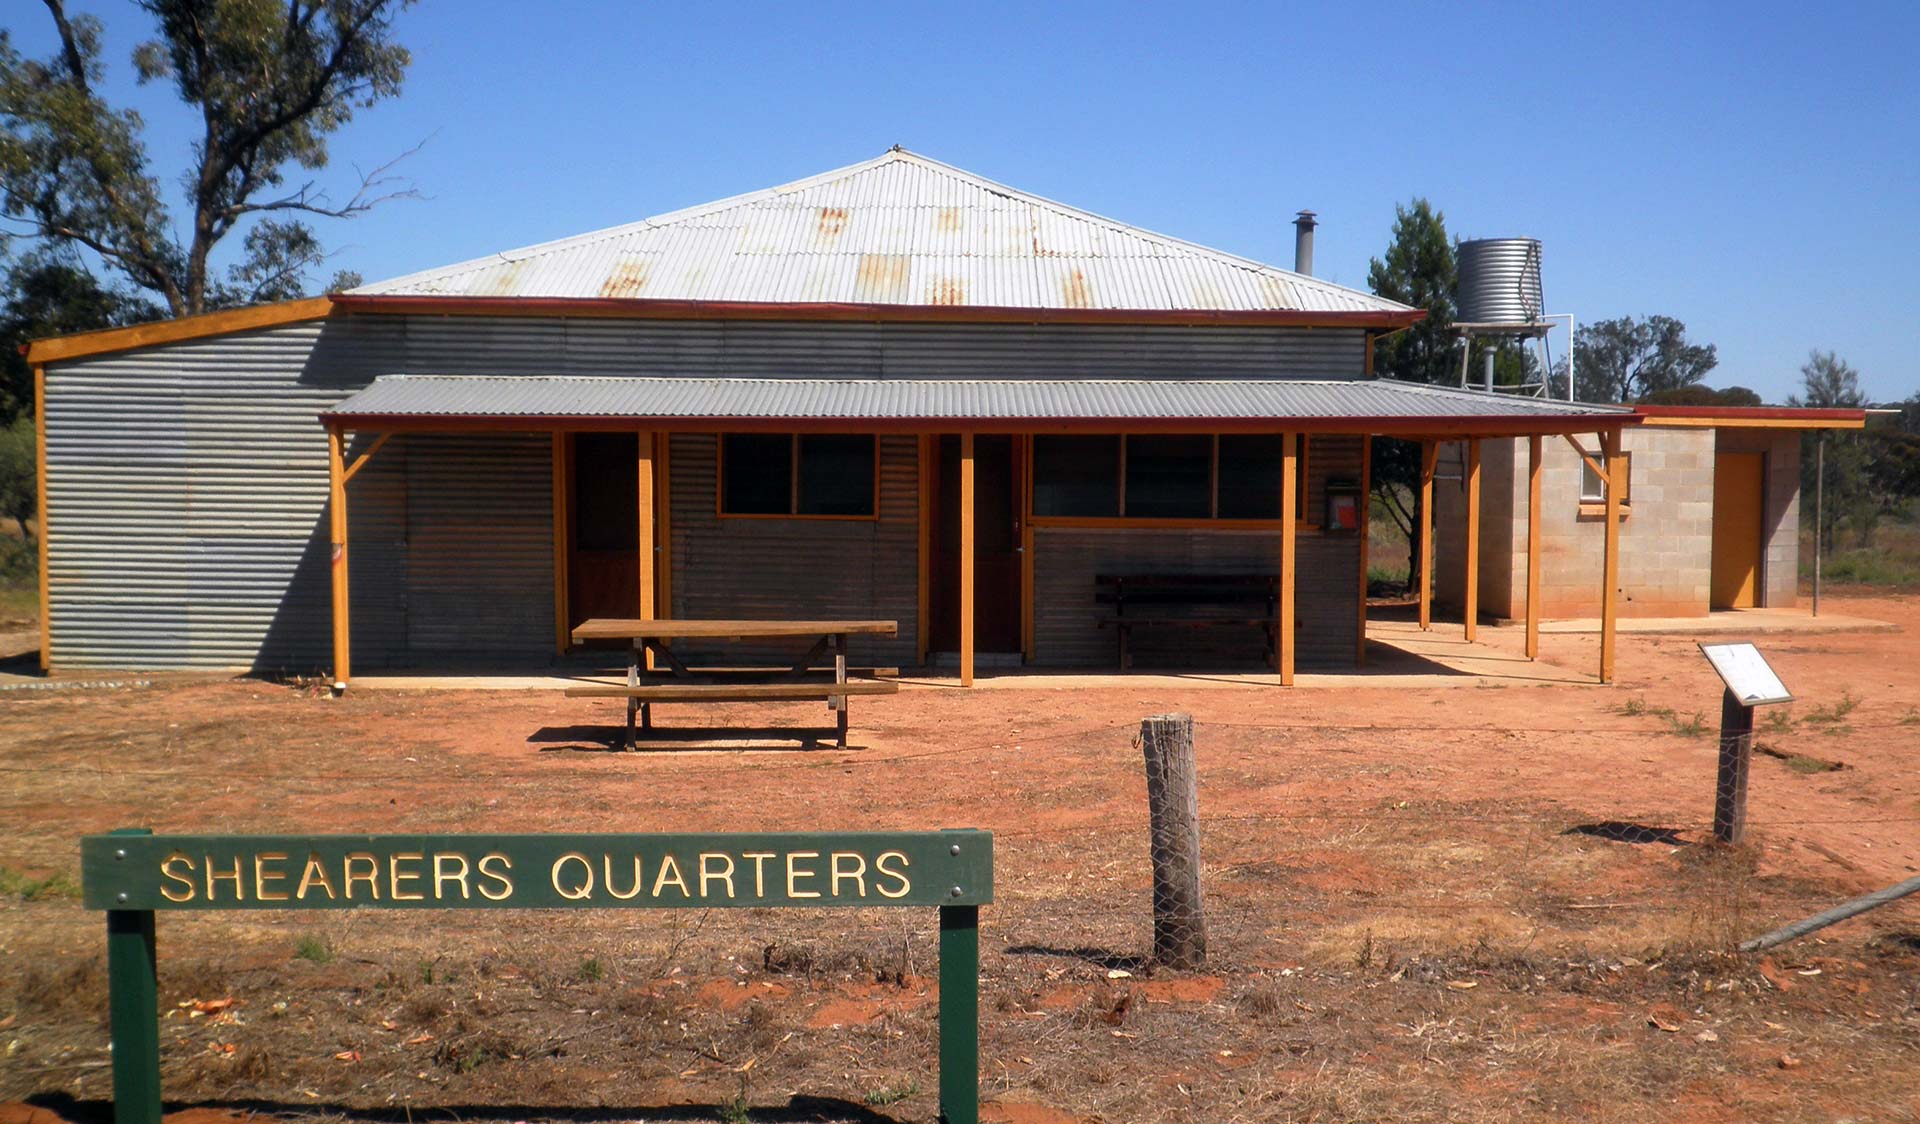 Shearers Quarters - an historic self-contained four bedroom cottage in the middle of the Murray Sunset National Park.  